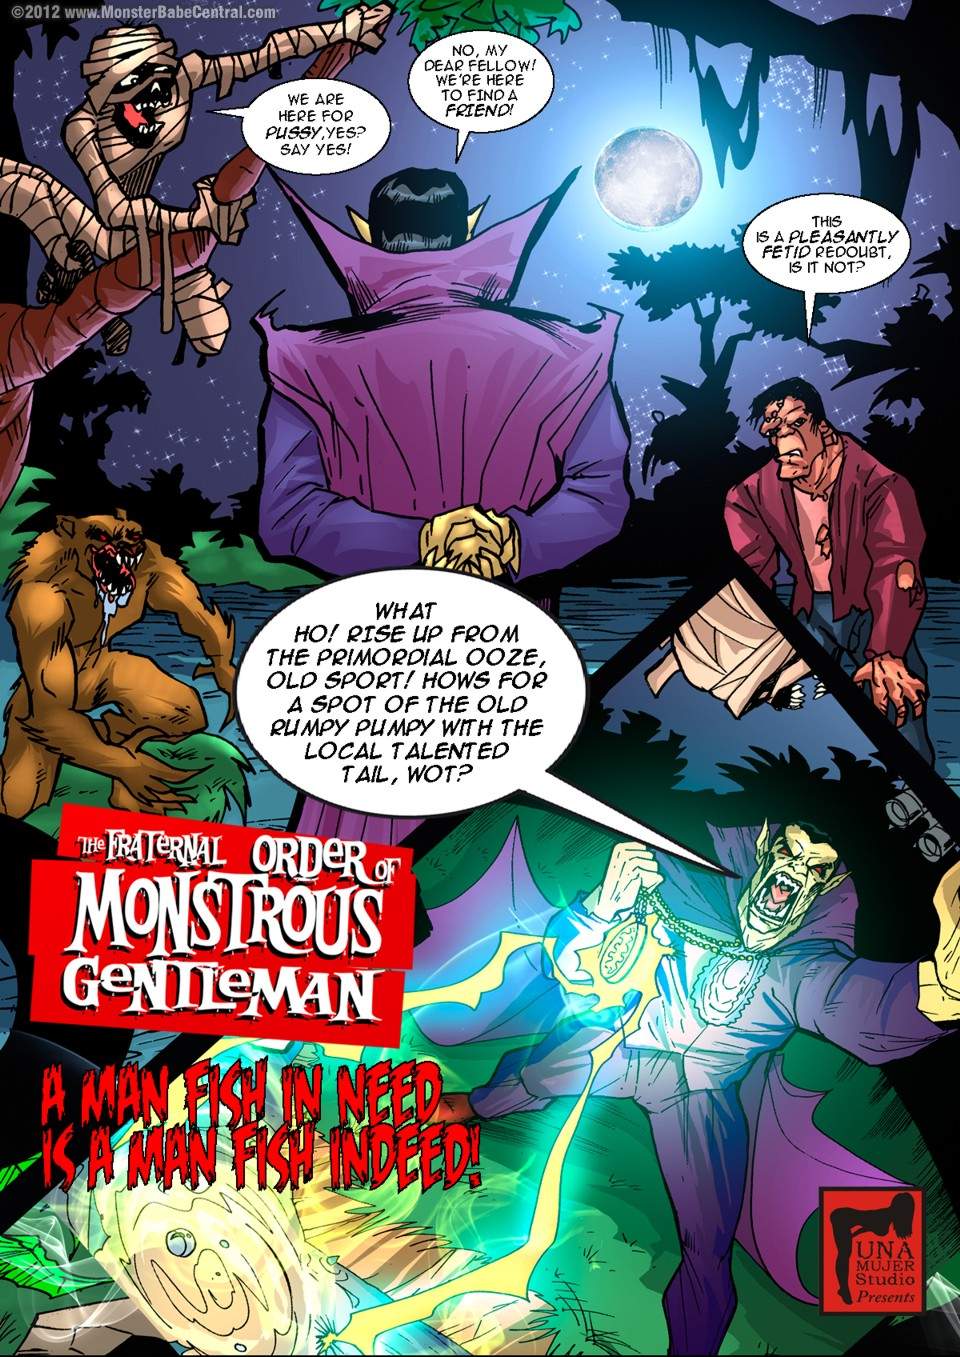 SureFap xxx porno Crossover - [MonsterBabeCentral] - The Fraternal Order of Monstrous Gentlemen! - Issue 5 - Swamp Monster